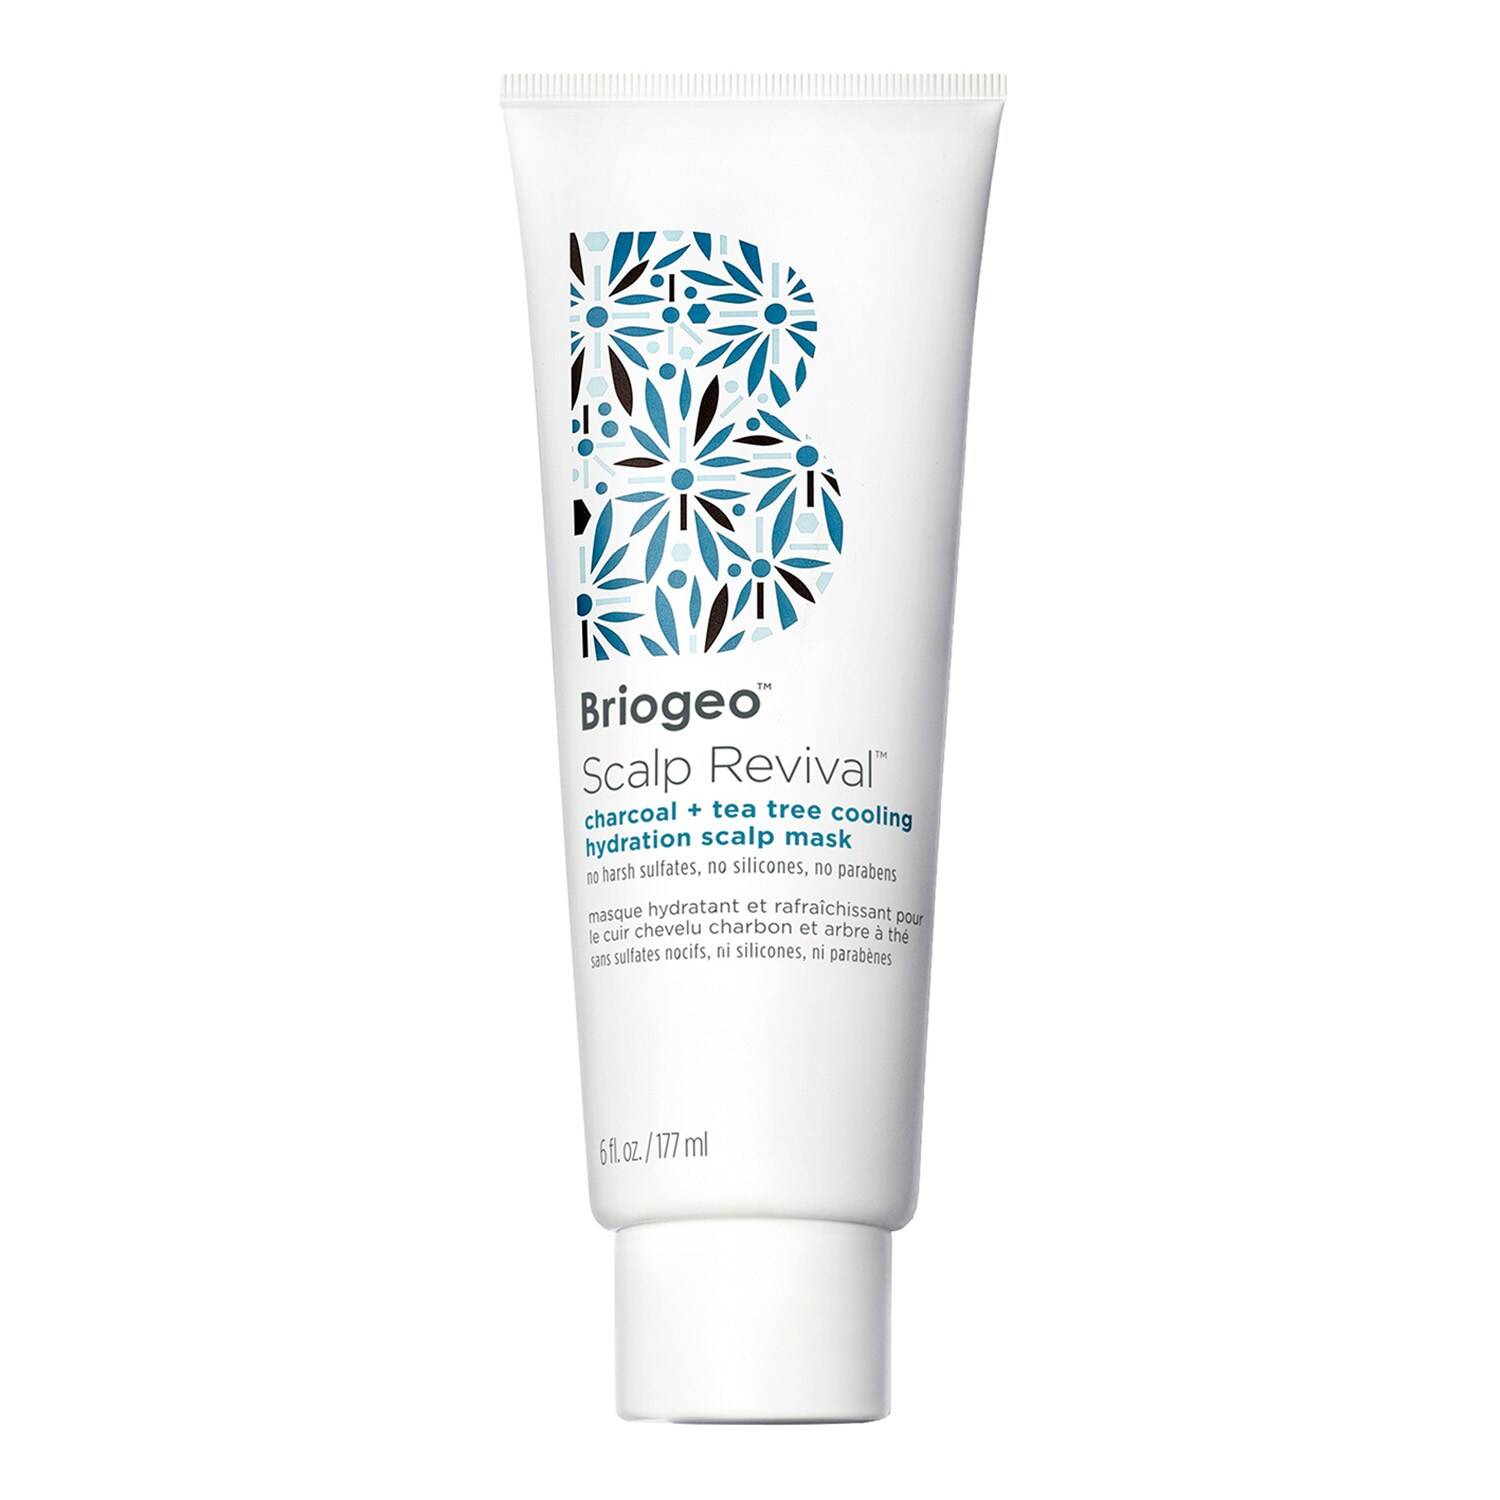 Briogeo Scalp Revival Charcoal + Tea Tree Cooling Hydration Mask For Dry, Itchy Scalp 177Ml